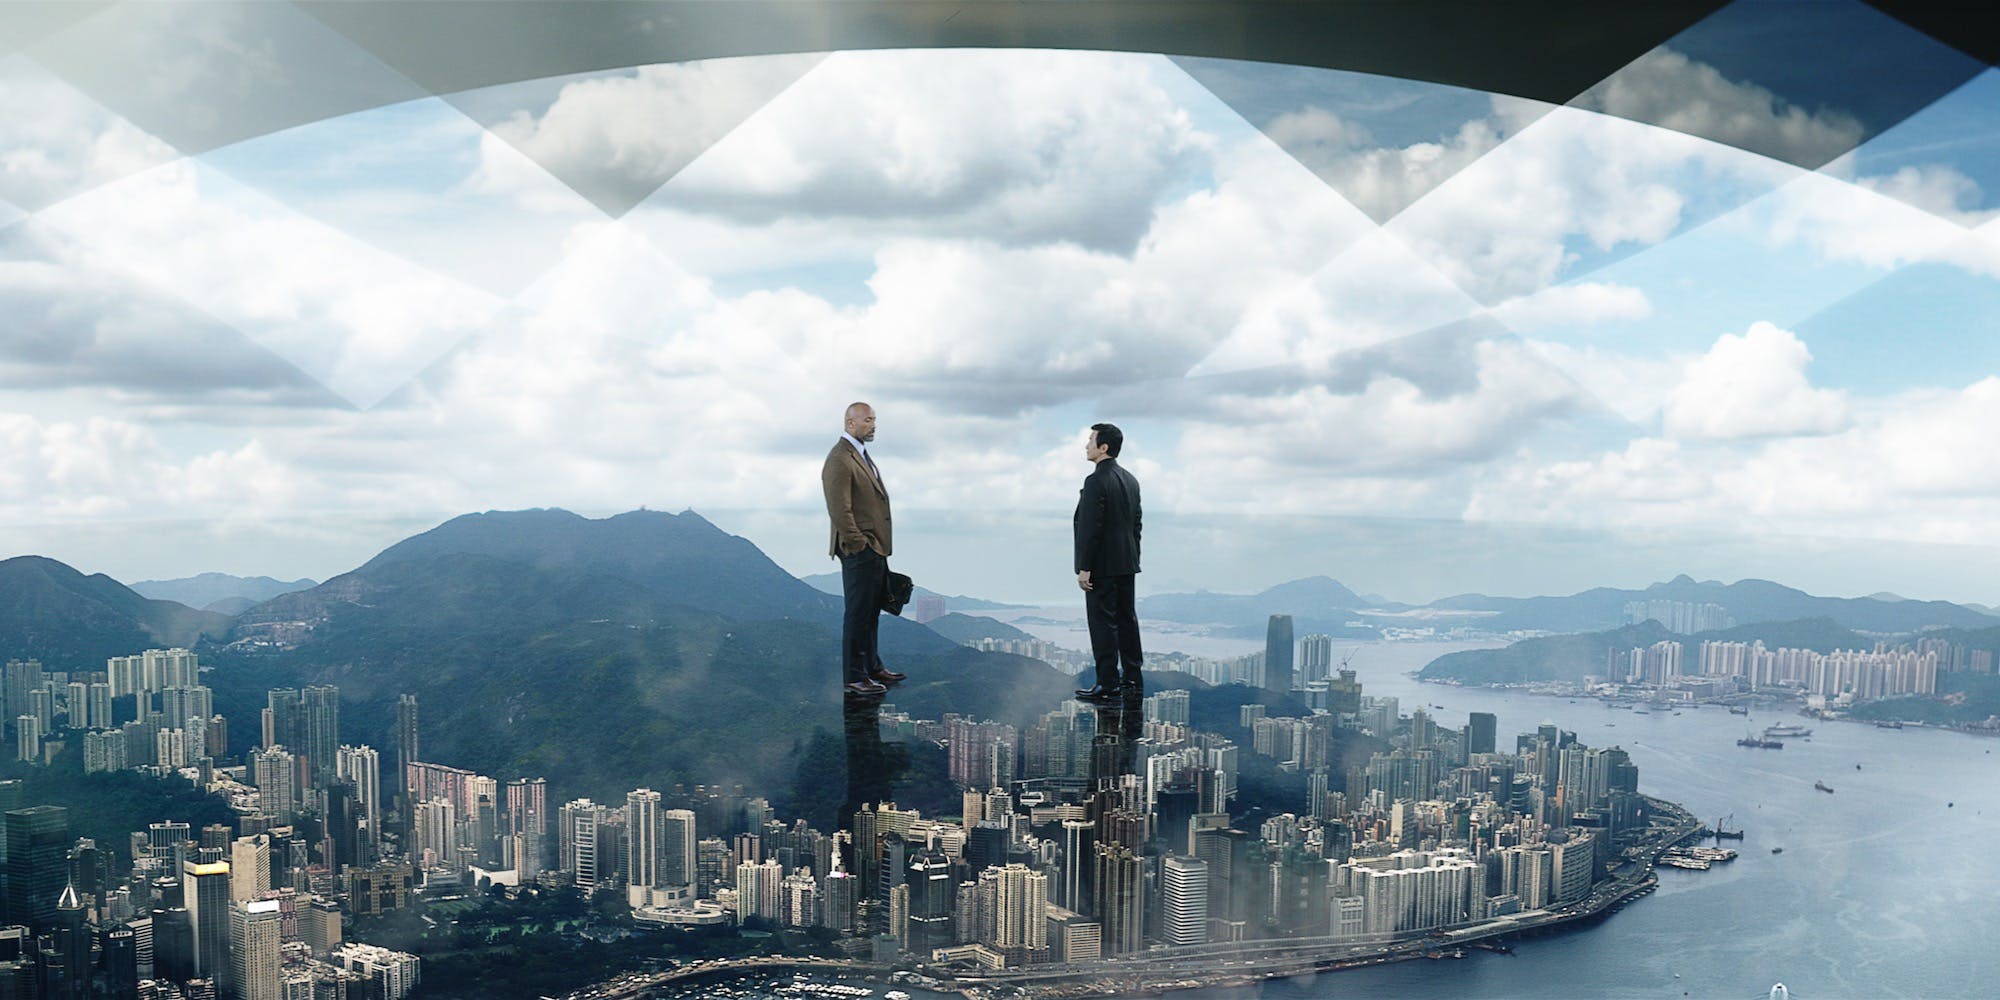 Will Sawyer (Dwayne Johnson) and Zhao Long Ji (Chin Han) enjoy the view from inside the Pearl in the movie Skyscraper